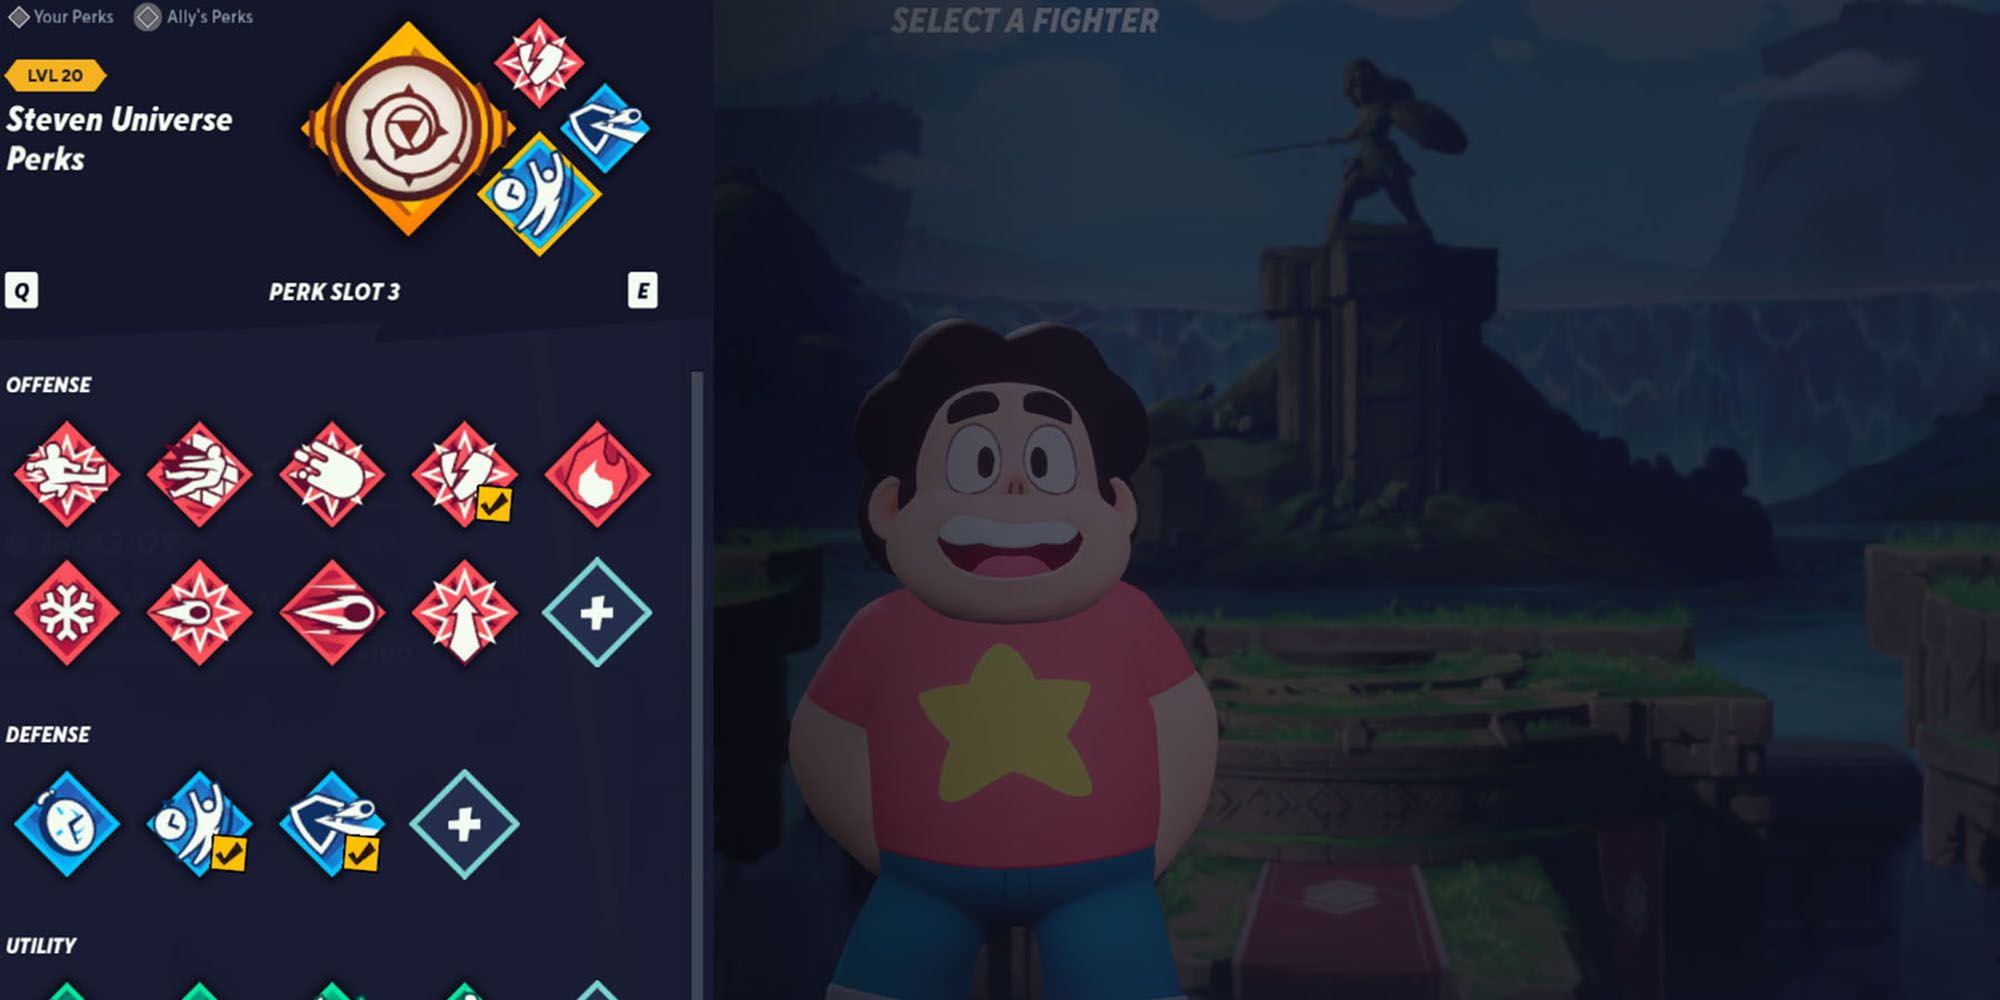 Multiversus - The Equipping Perks Screen For Steven Universe